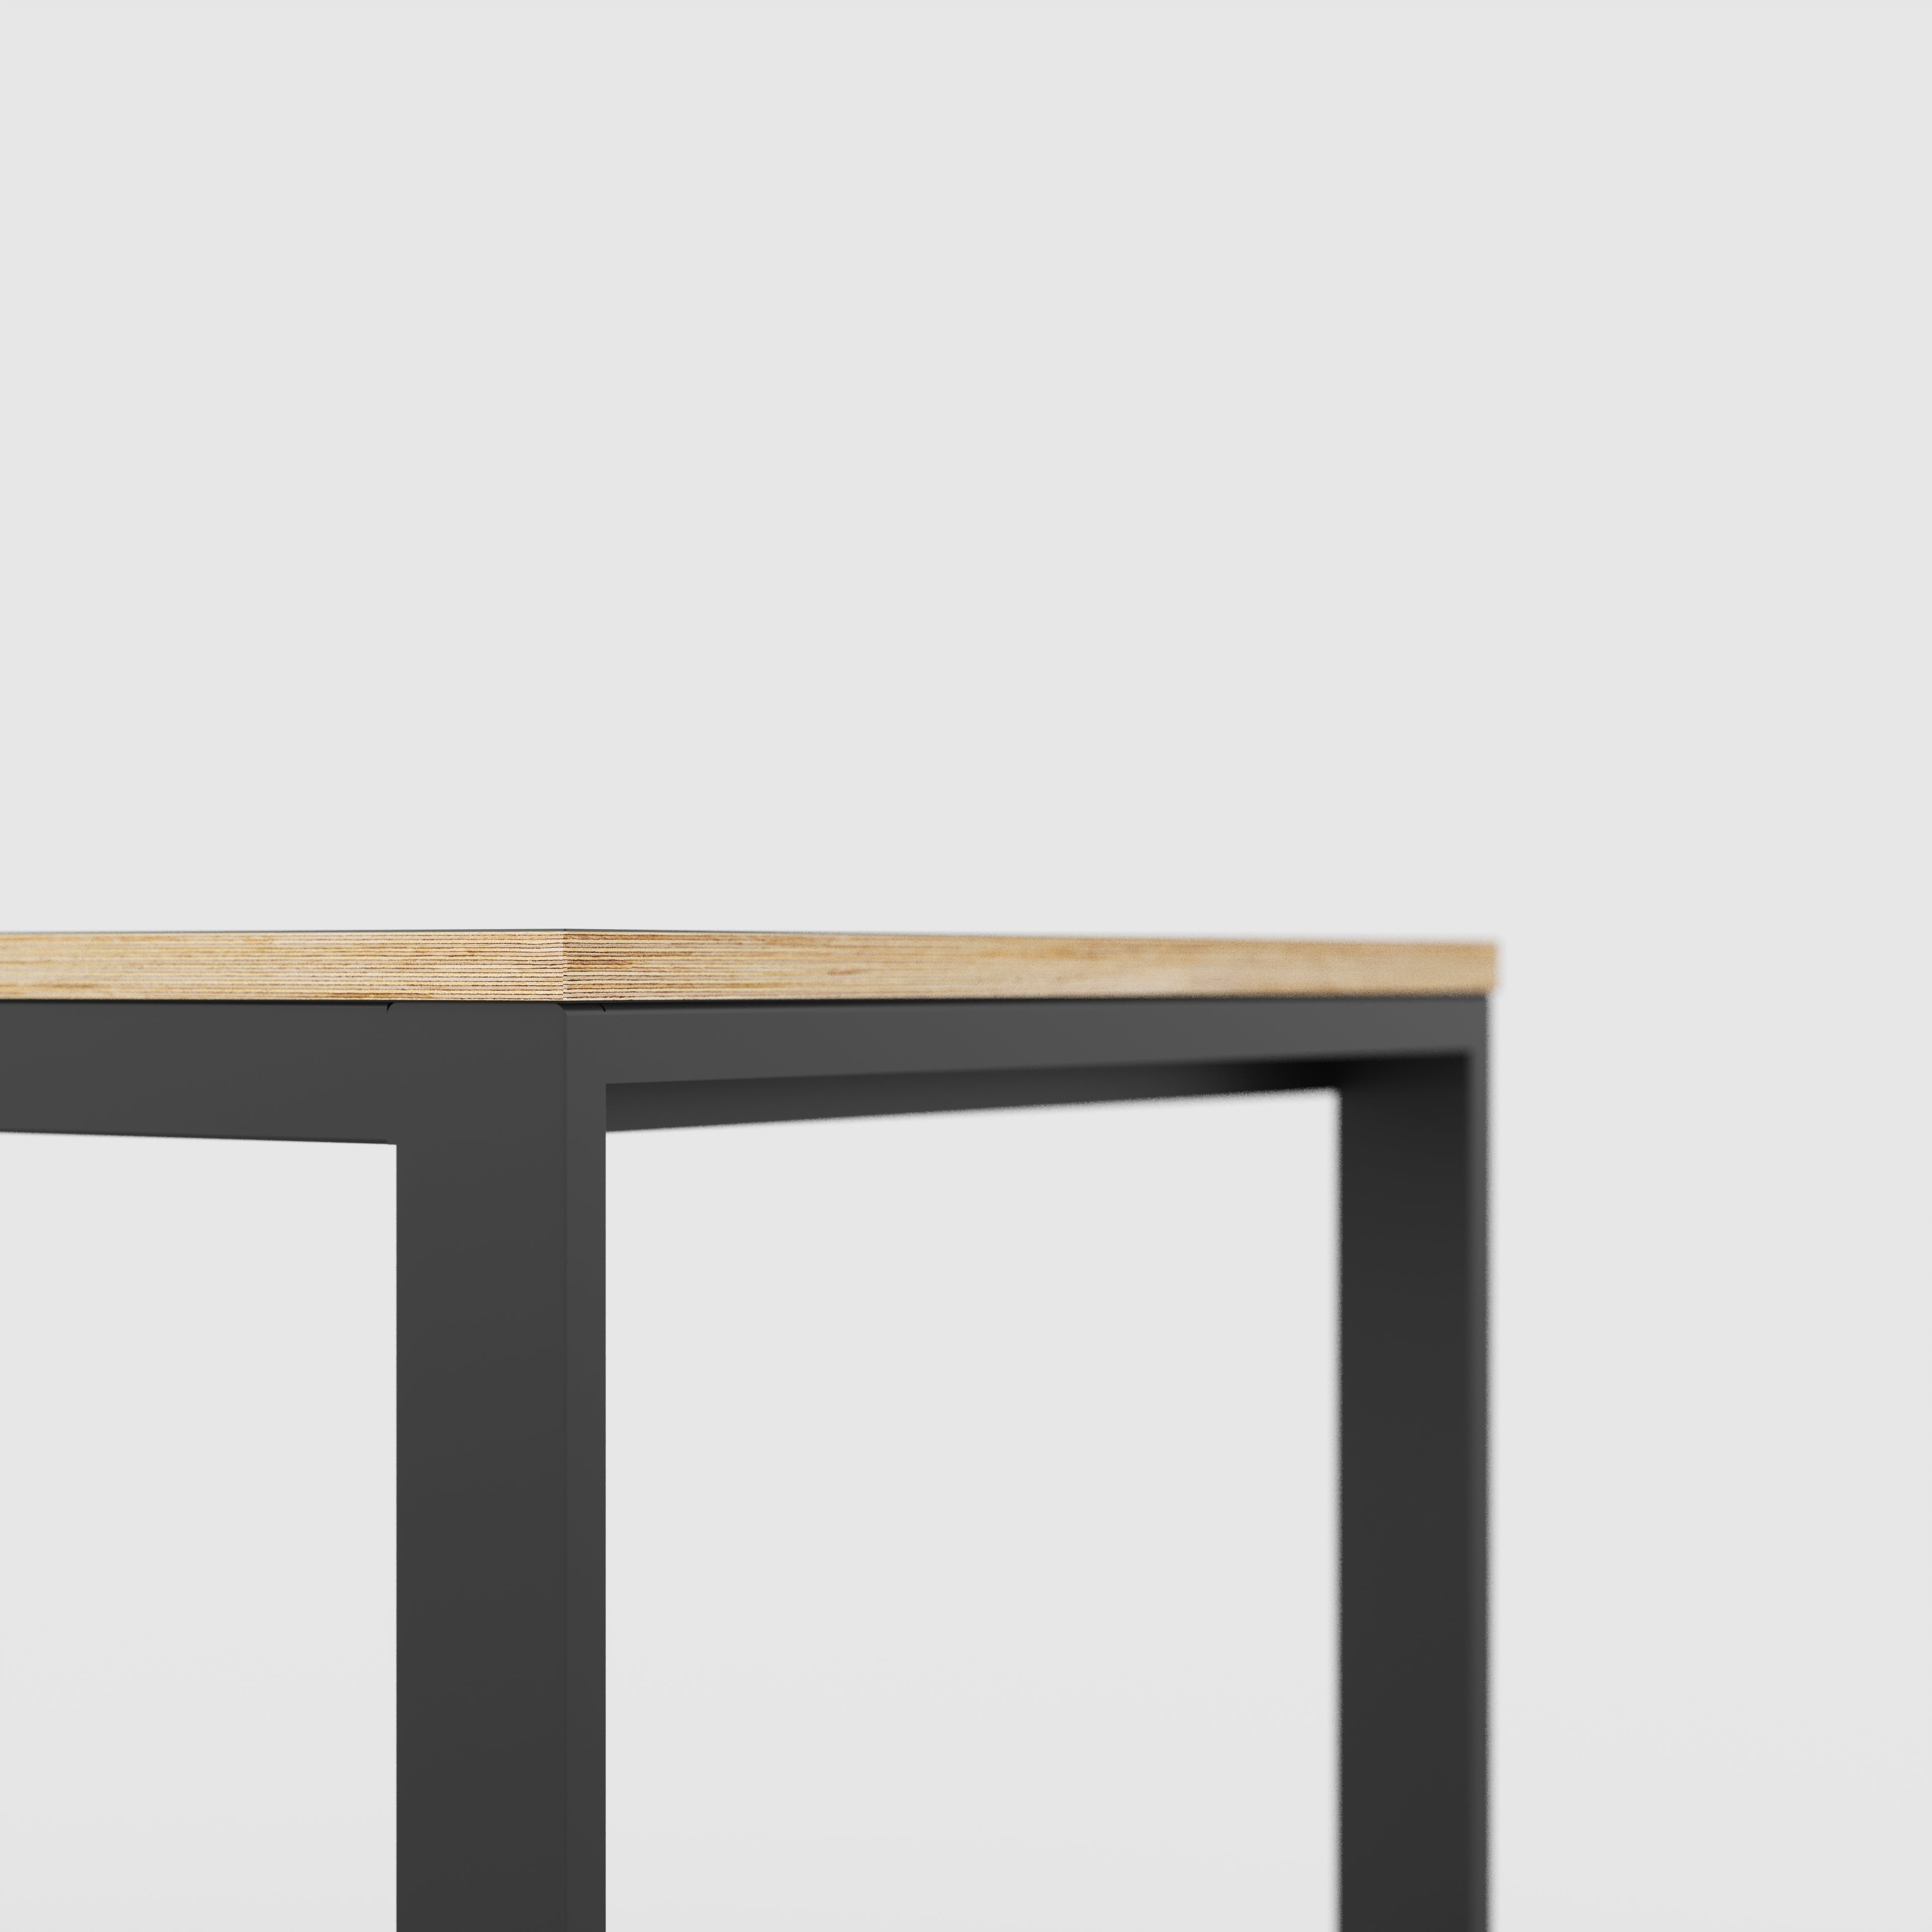 Table with Black Industrial Frame - Formica Levante Orange - 2400(w) x 745(d) x 735(h)